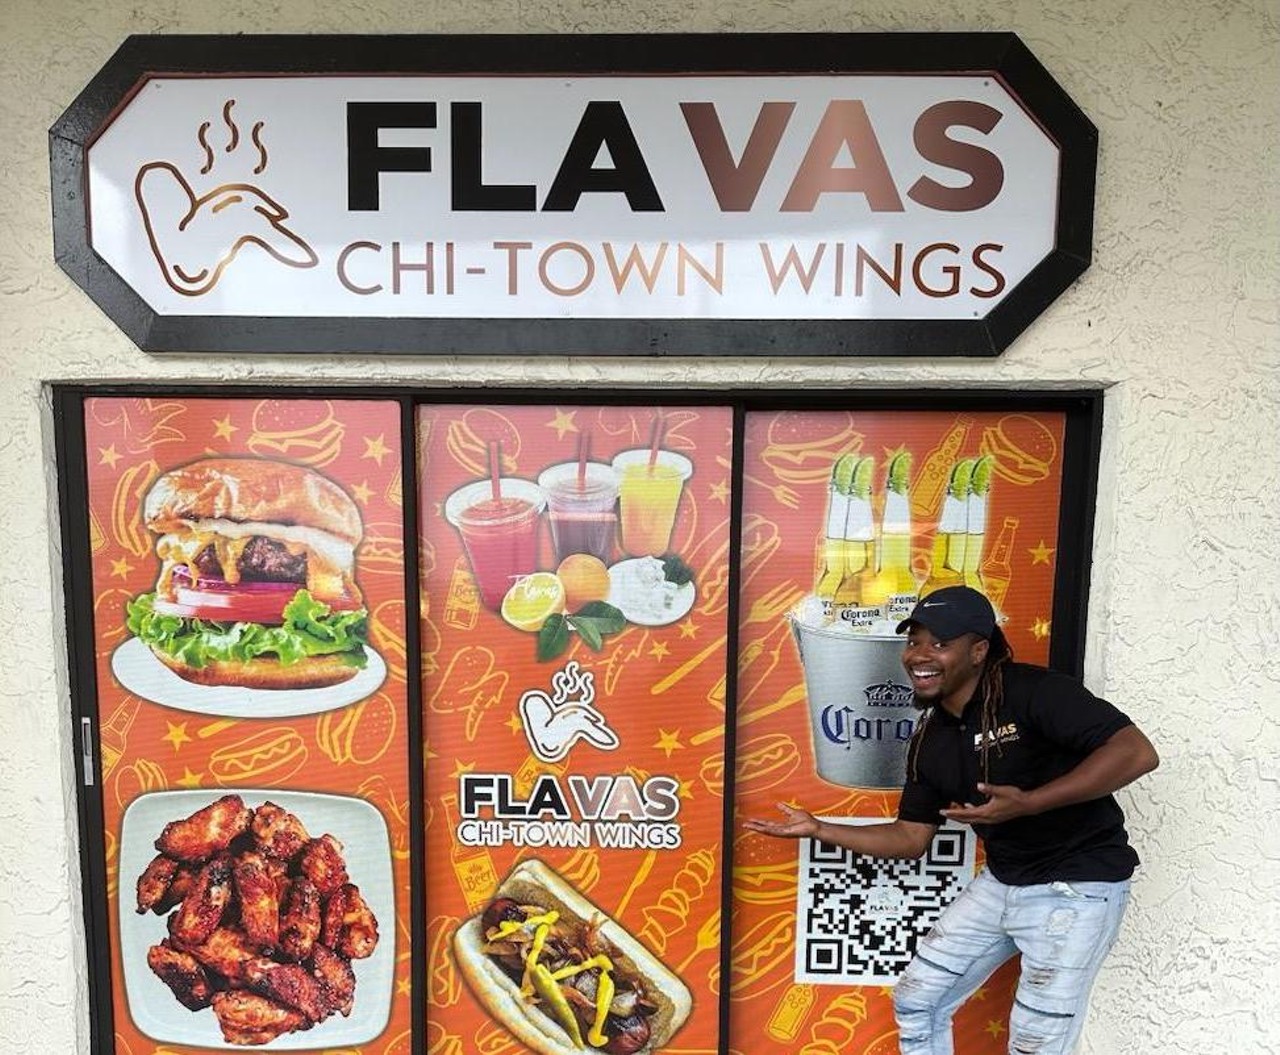 Flava's Chitown Wings
4819 E Busch Blvd., Tampa
Opening last September, Flava's is all about, you guessed it, wings. The new spot offers dozens of chicken wing variations—from unique sauces to dry rubs, and everything in between. Just a handful of wing flavors include chili lime, honey barbecue, ghost pepper, Nashville hot, mango habanero and garlic parmesan. Flavas co-owners Jacques Brooks (pictured) and partner Deonta Taylor recently relocated from Chicago, and wanted to bring a taste of home back to Tampa. A few Chicago-inspired items on their menu include a Polish sausage topped with cheese, grilled onions and peppers, and the city's beloved pizza puff, which is basically a fancy Hot Pocket.
Photo by via Flavas restaurant